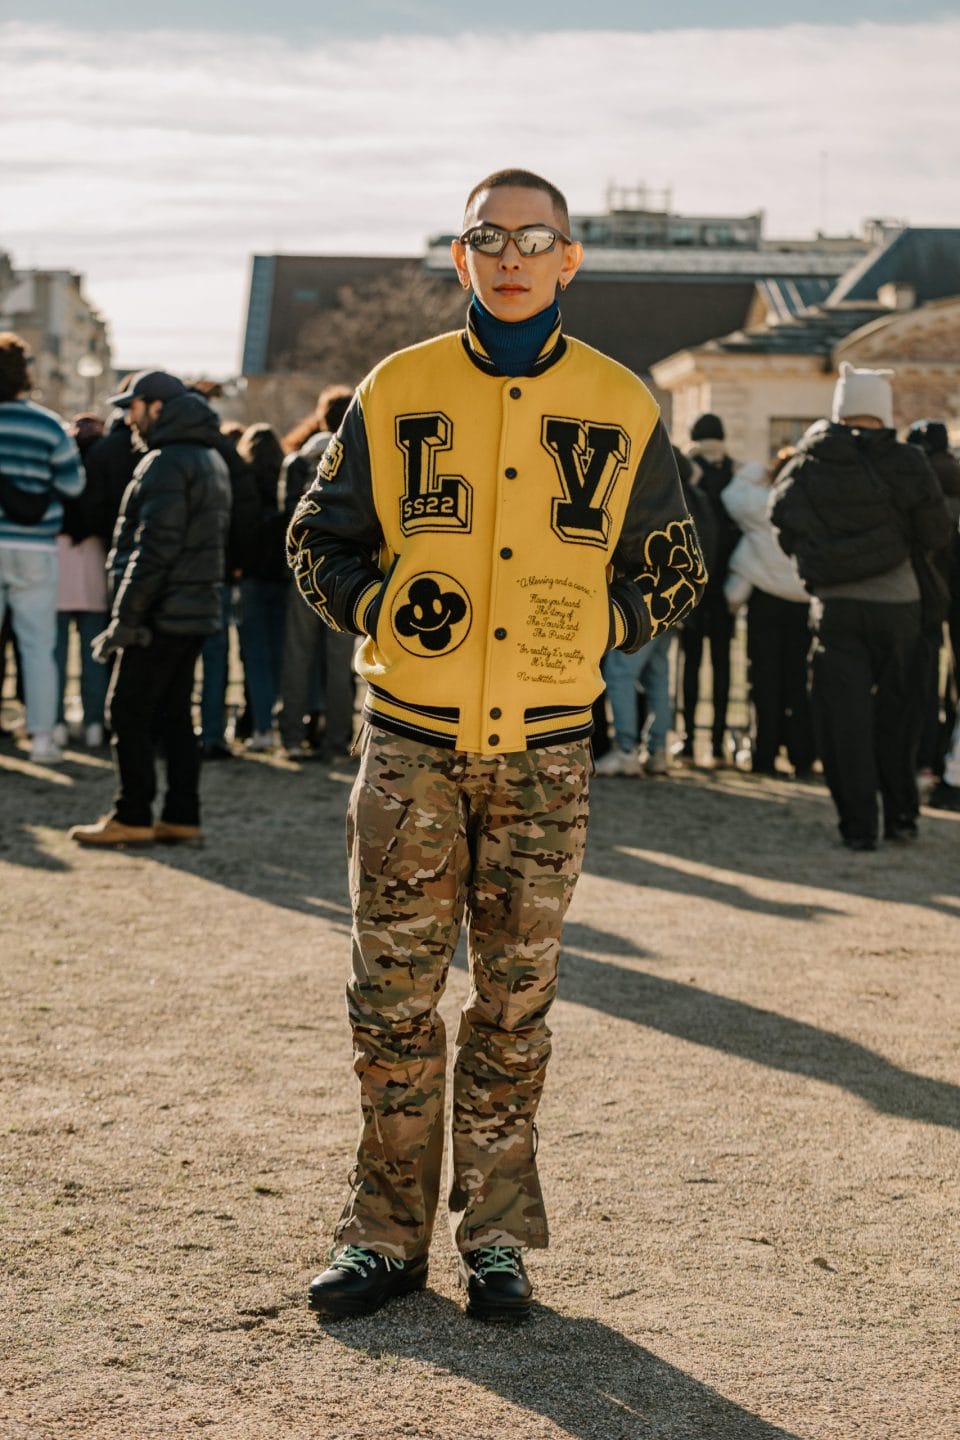 The Best Street Style Looks From Paris FW23 Menswear Shows